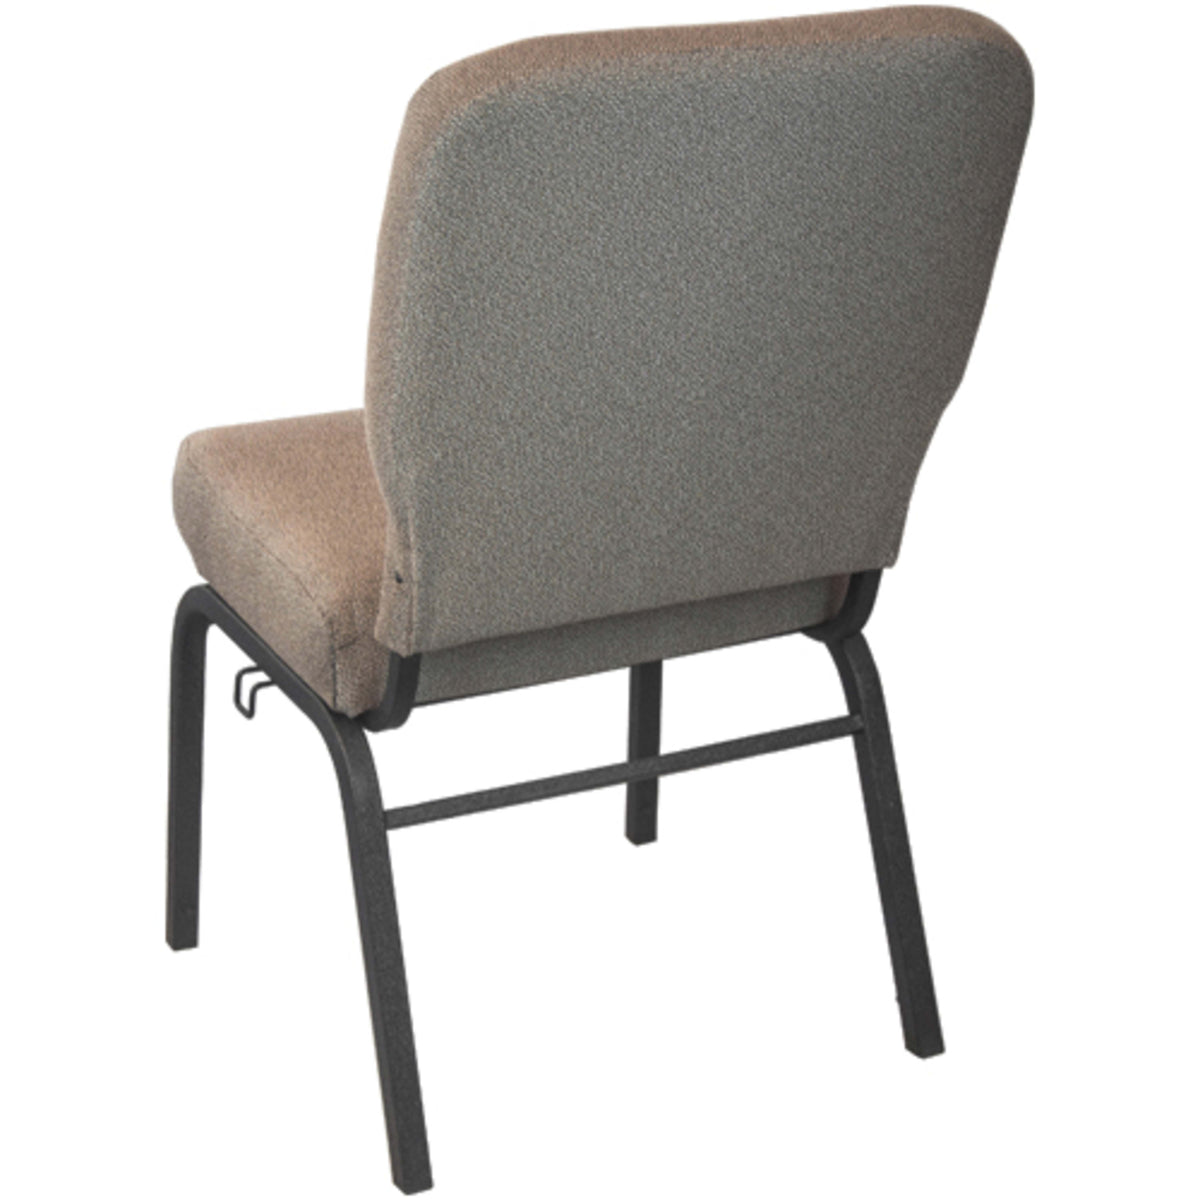 Tan Speckle Fabric/Black Frame |#| Tan Speckle Church Chair - 20 in. Wide